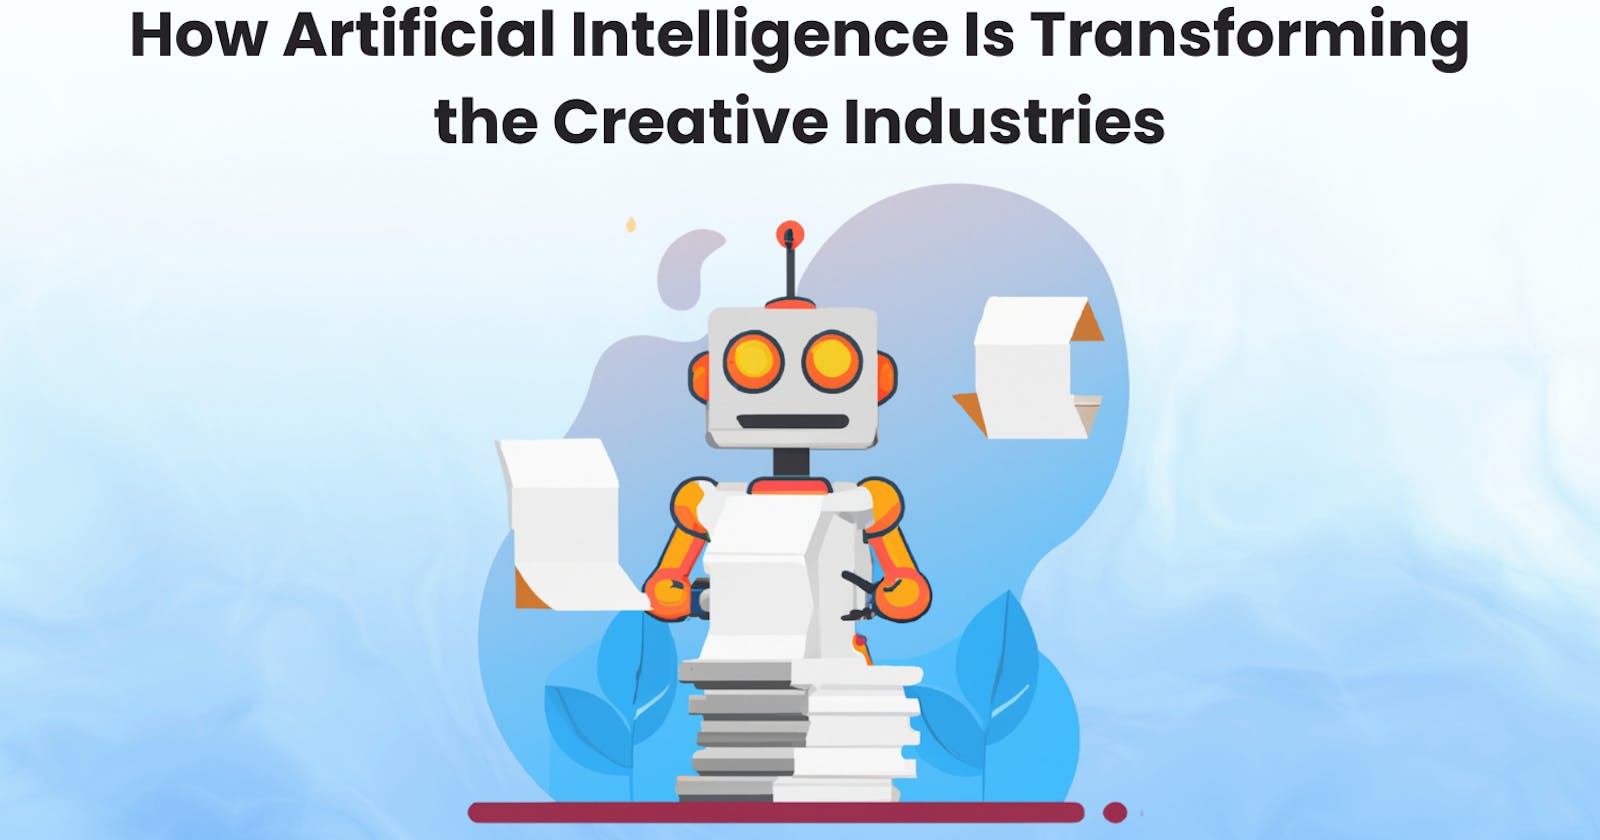 How Artificial Intelligence Is Transforming the Creative Industries